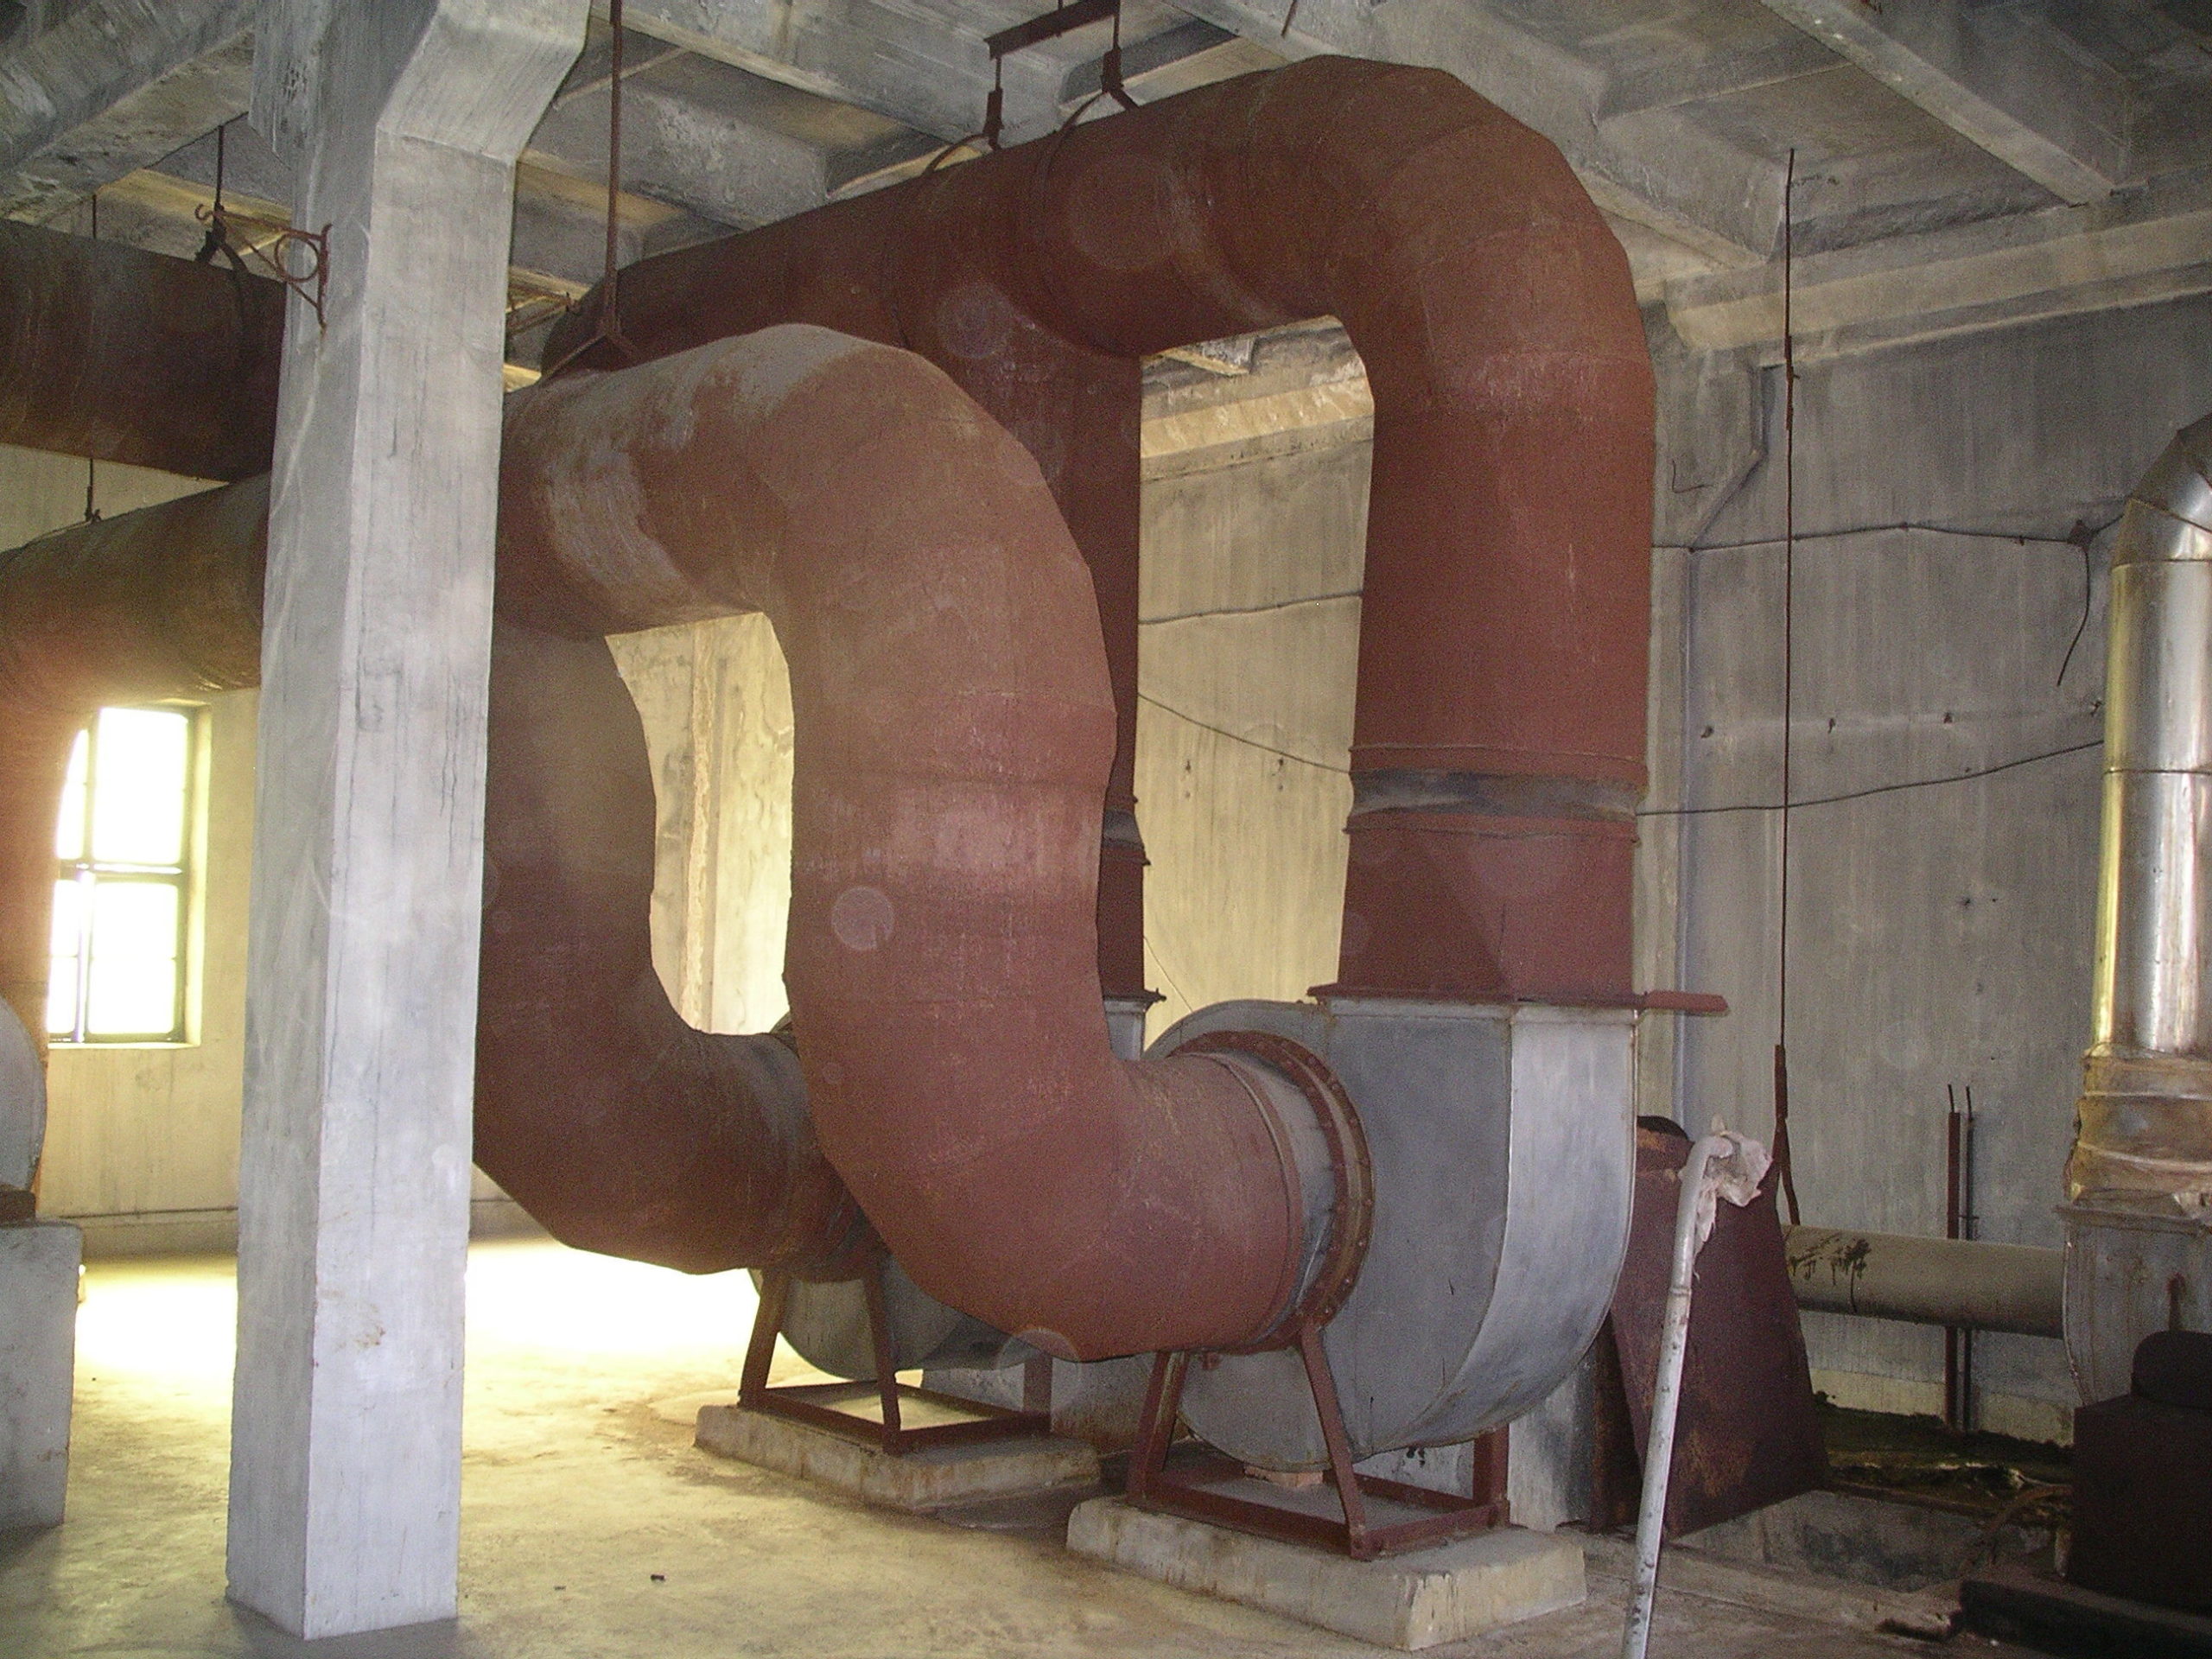 Massive curved pipes used for ventilation